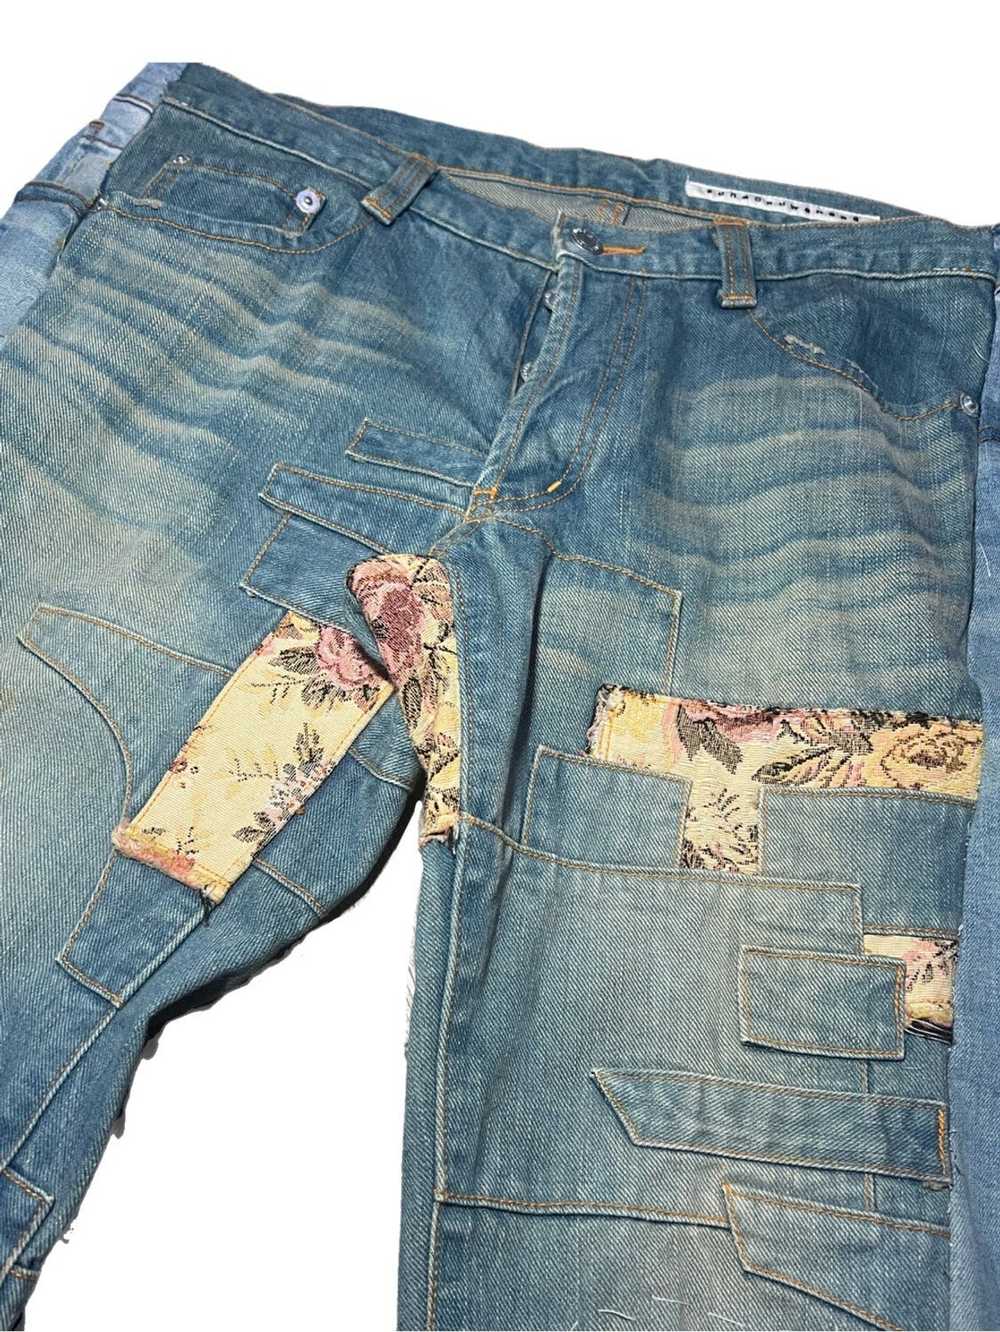 Issey Miyake Floral Patchwork Jeans - image 4